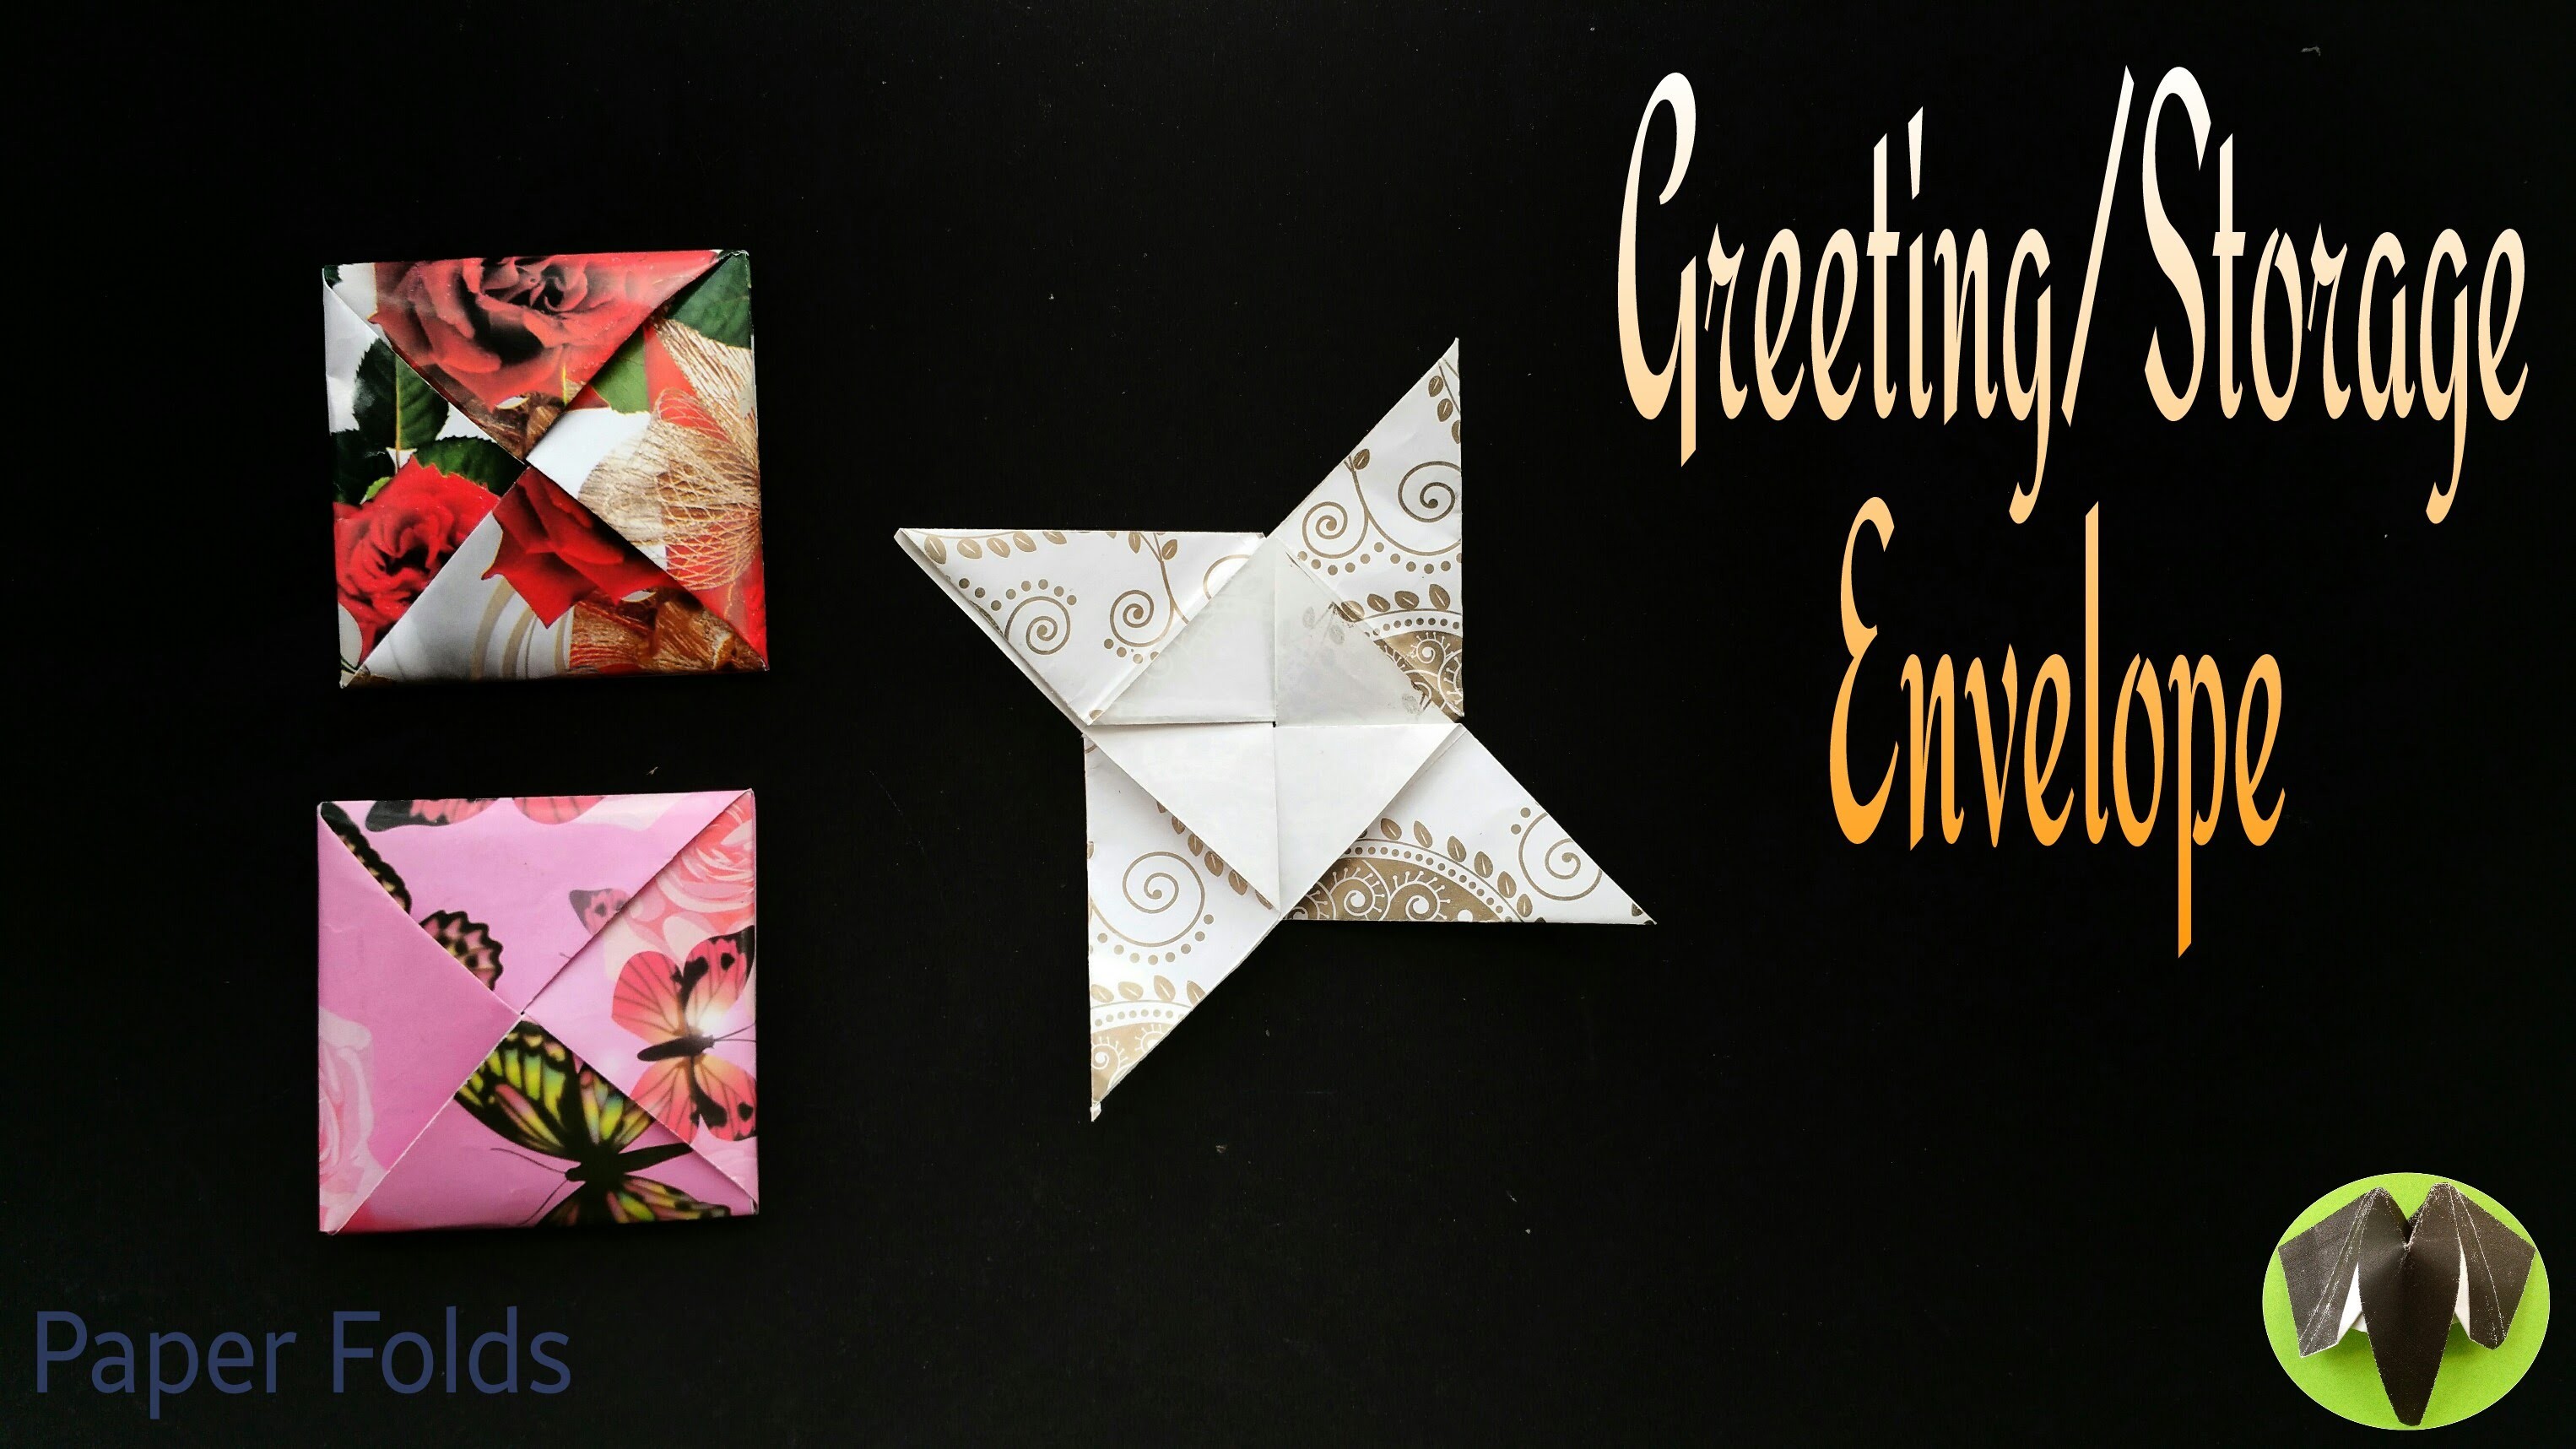 How to make a Paper "Storage. Greeting Envelope ✉" for Mother's day - Useful Origami Tutorial 